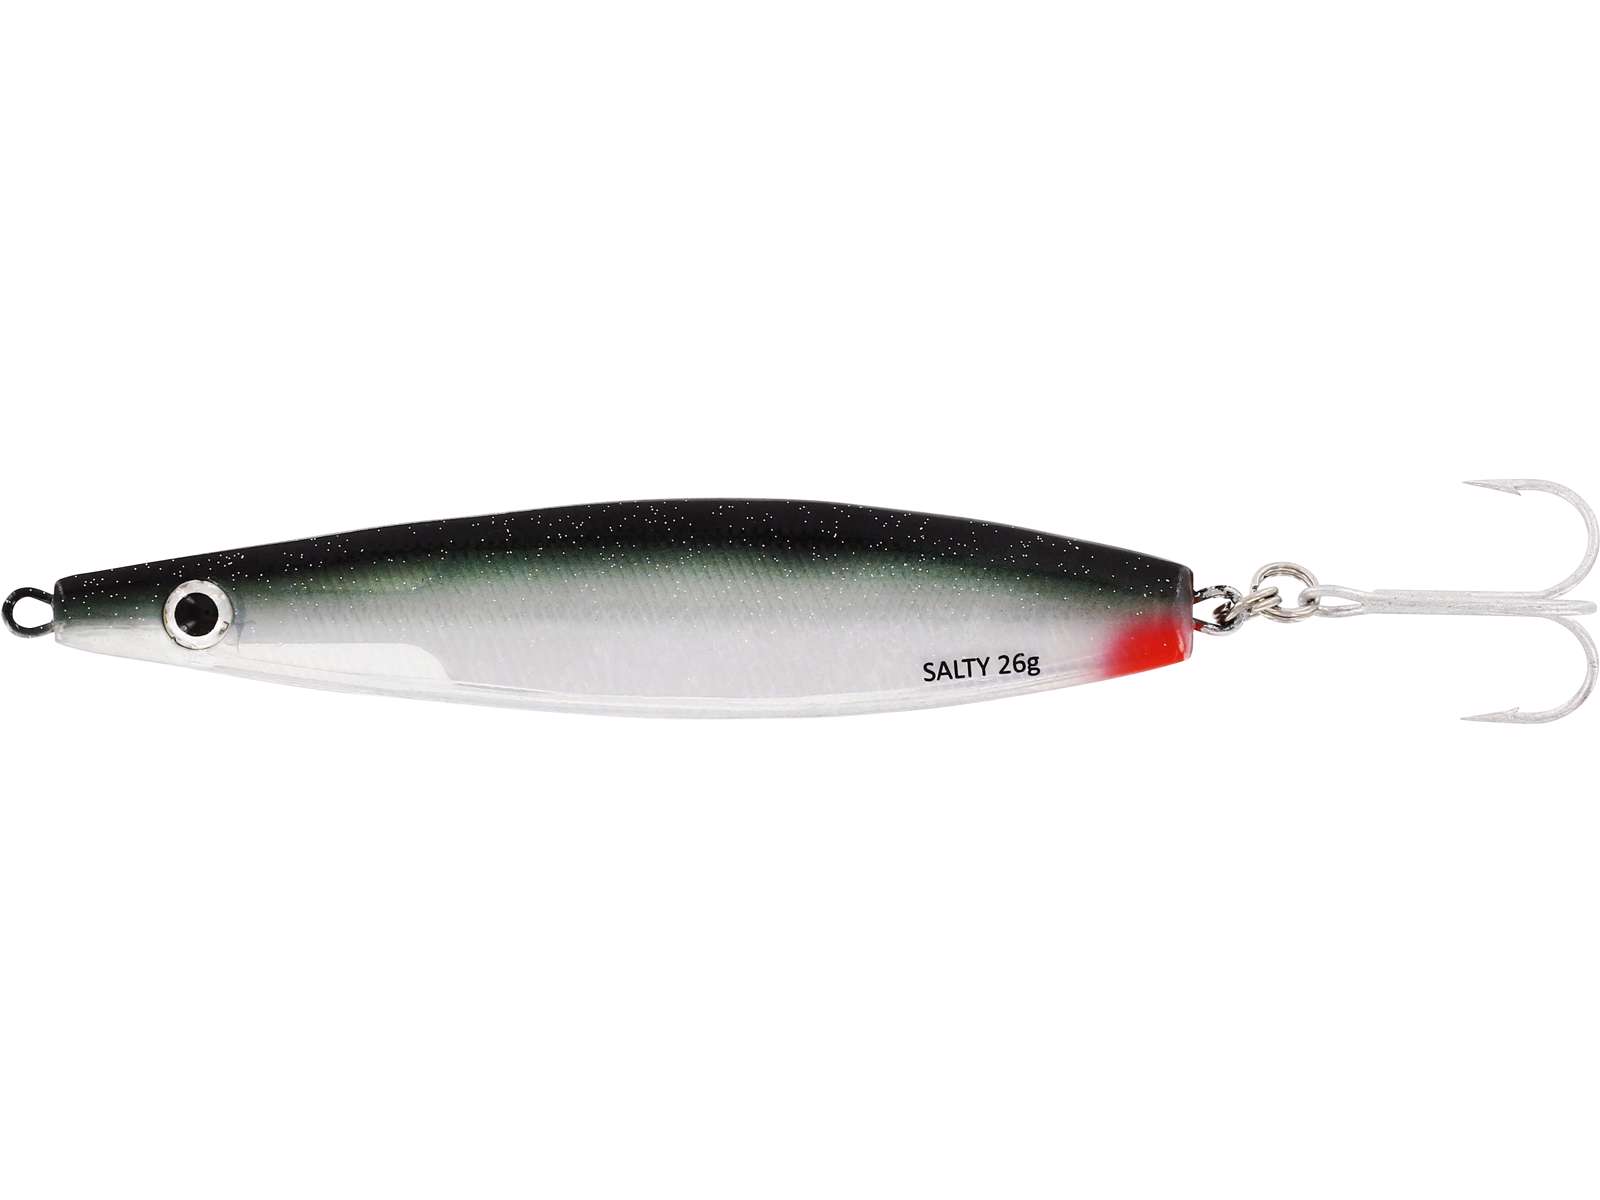 Westin Salty Spin Lure - Sea Fishing Lure - All Sizes